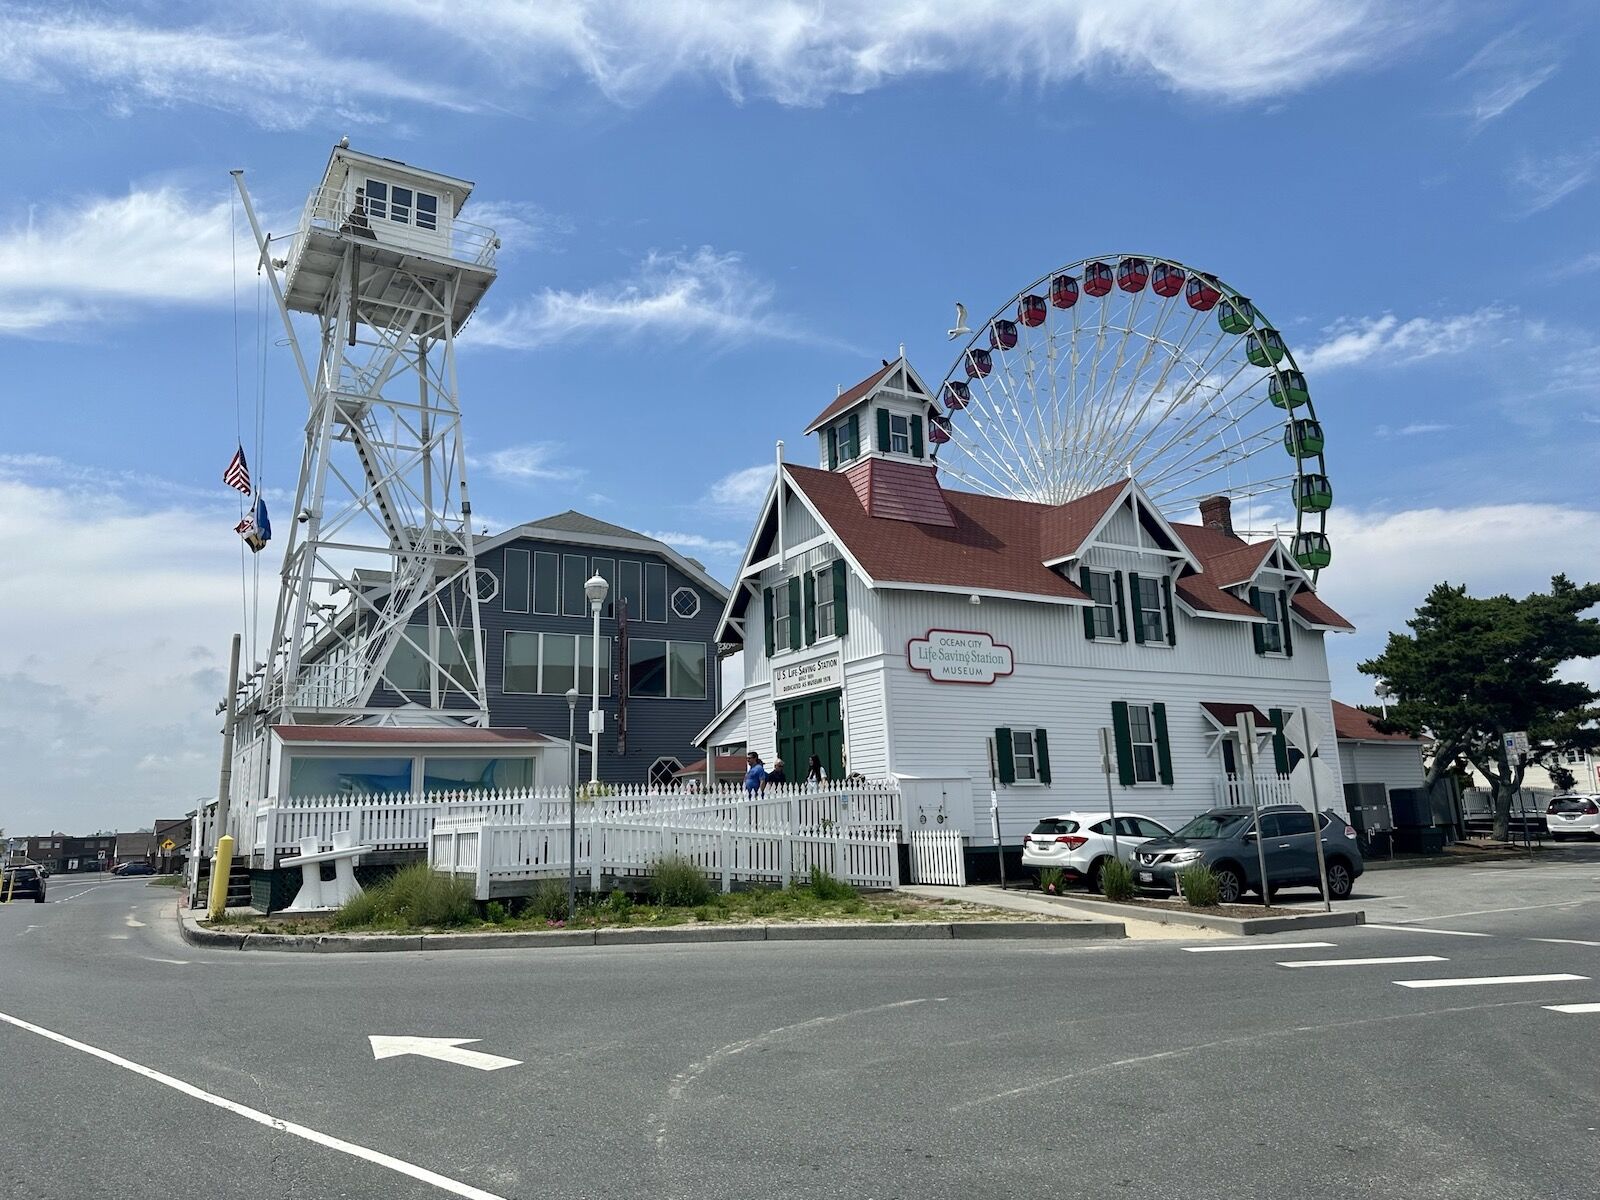 things to do in ocean city md - life saving museum